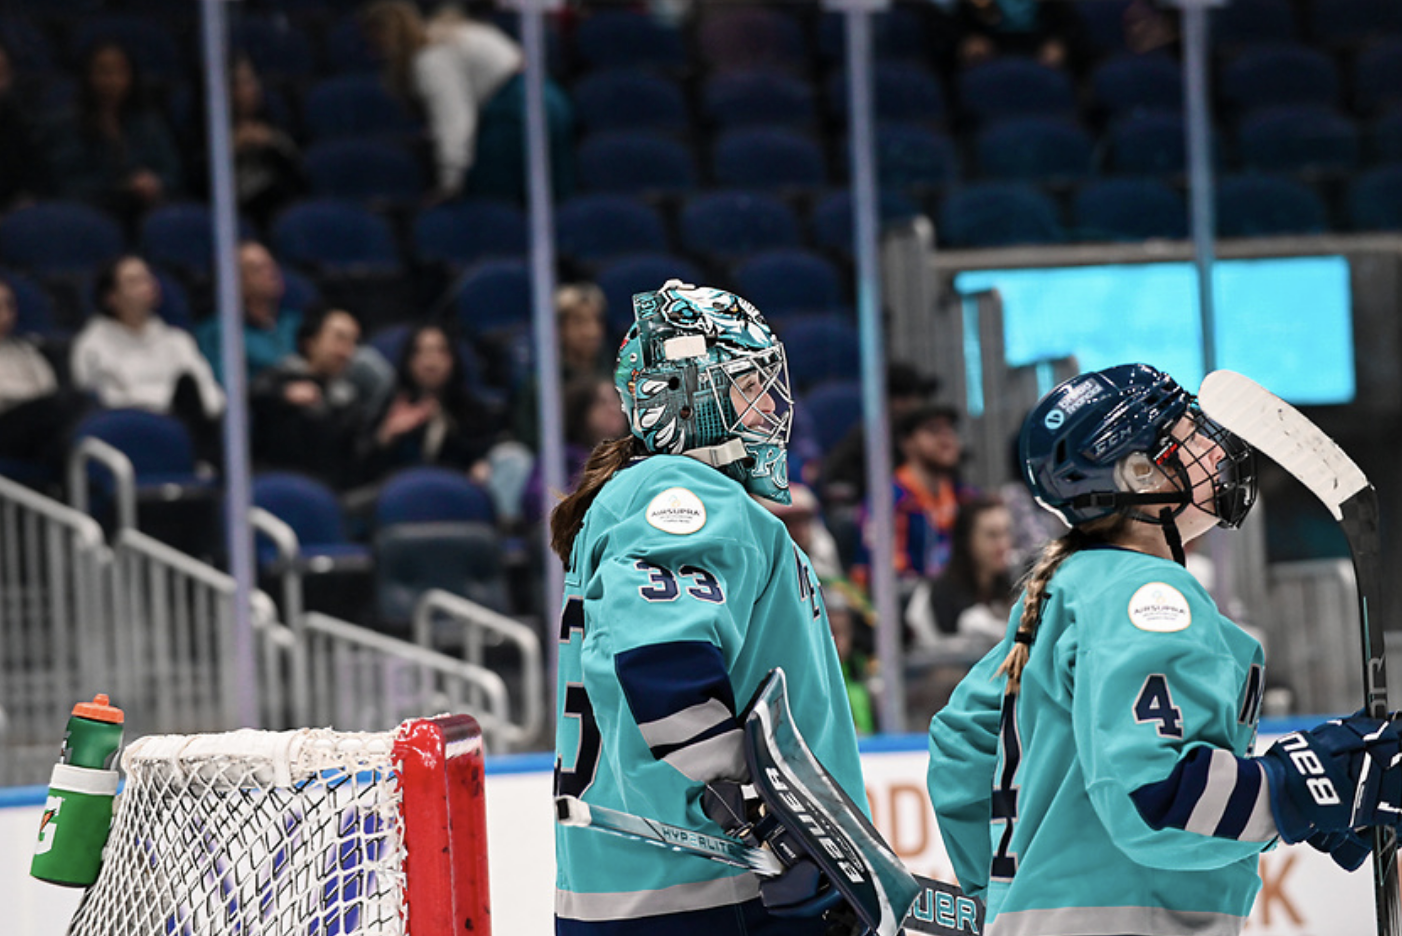 Post (left, in front of the net) and Baker (right, in front of Post) look up ice. They are wearing teal home jerseys.